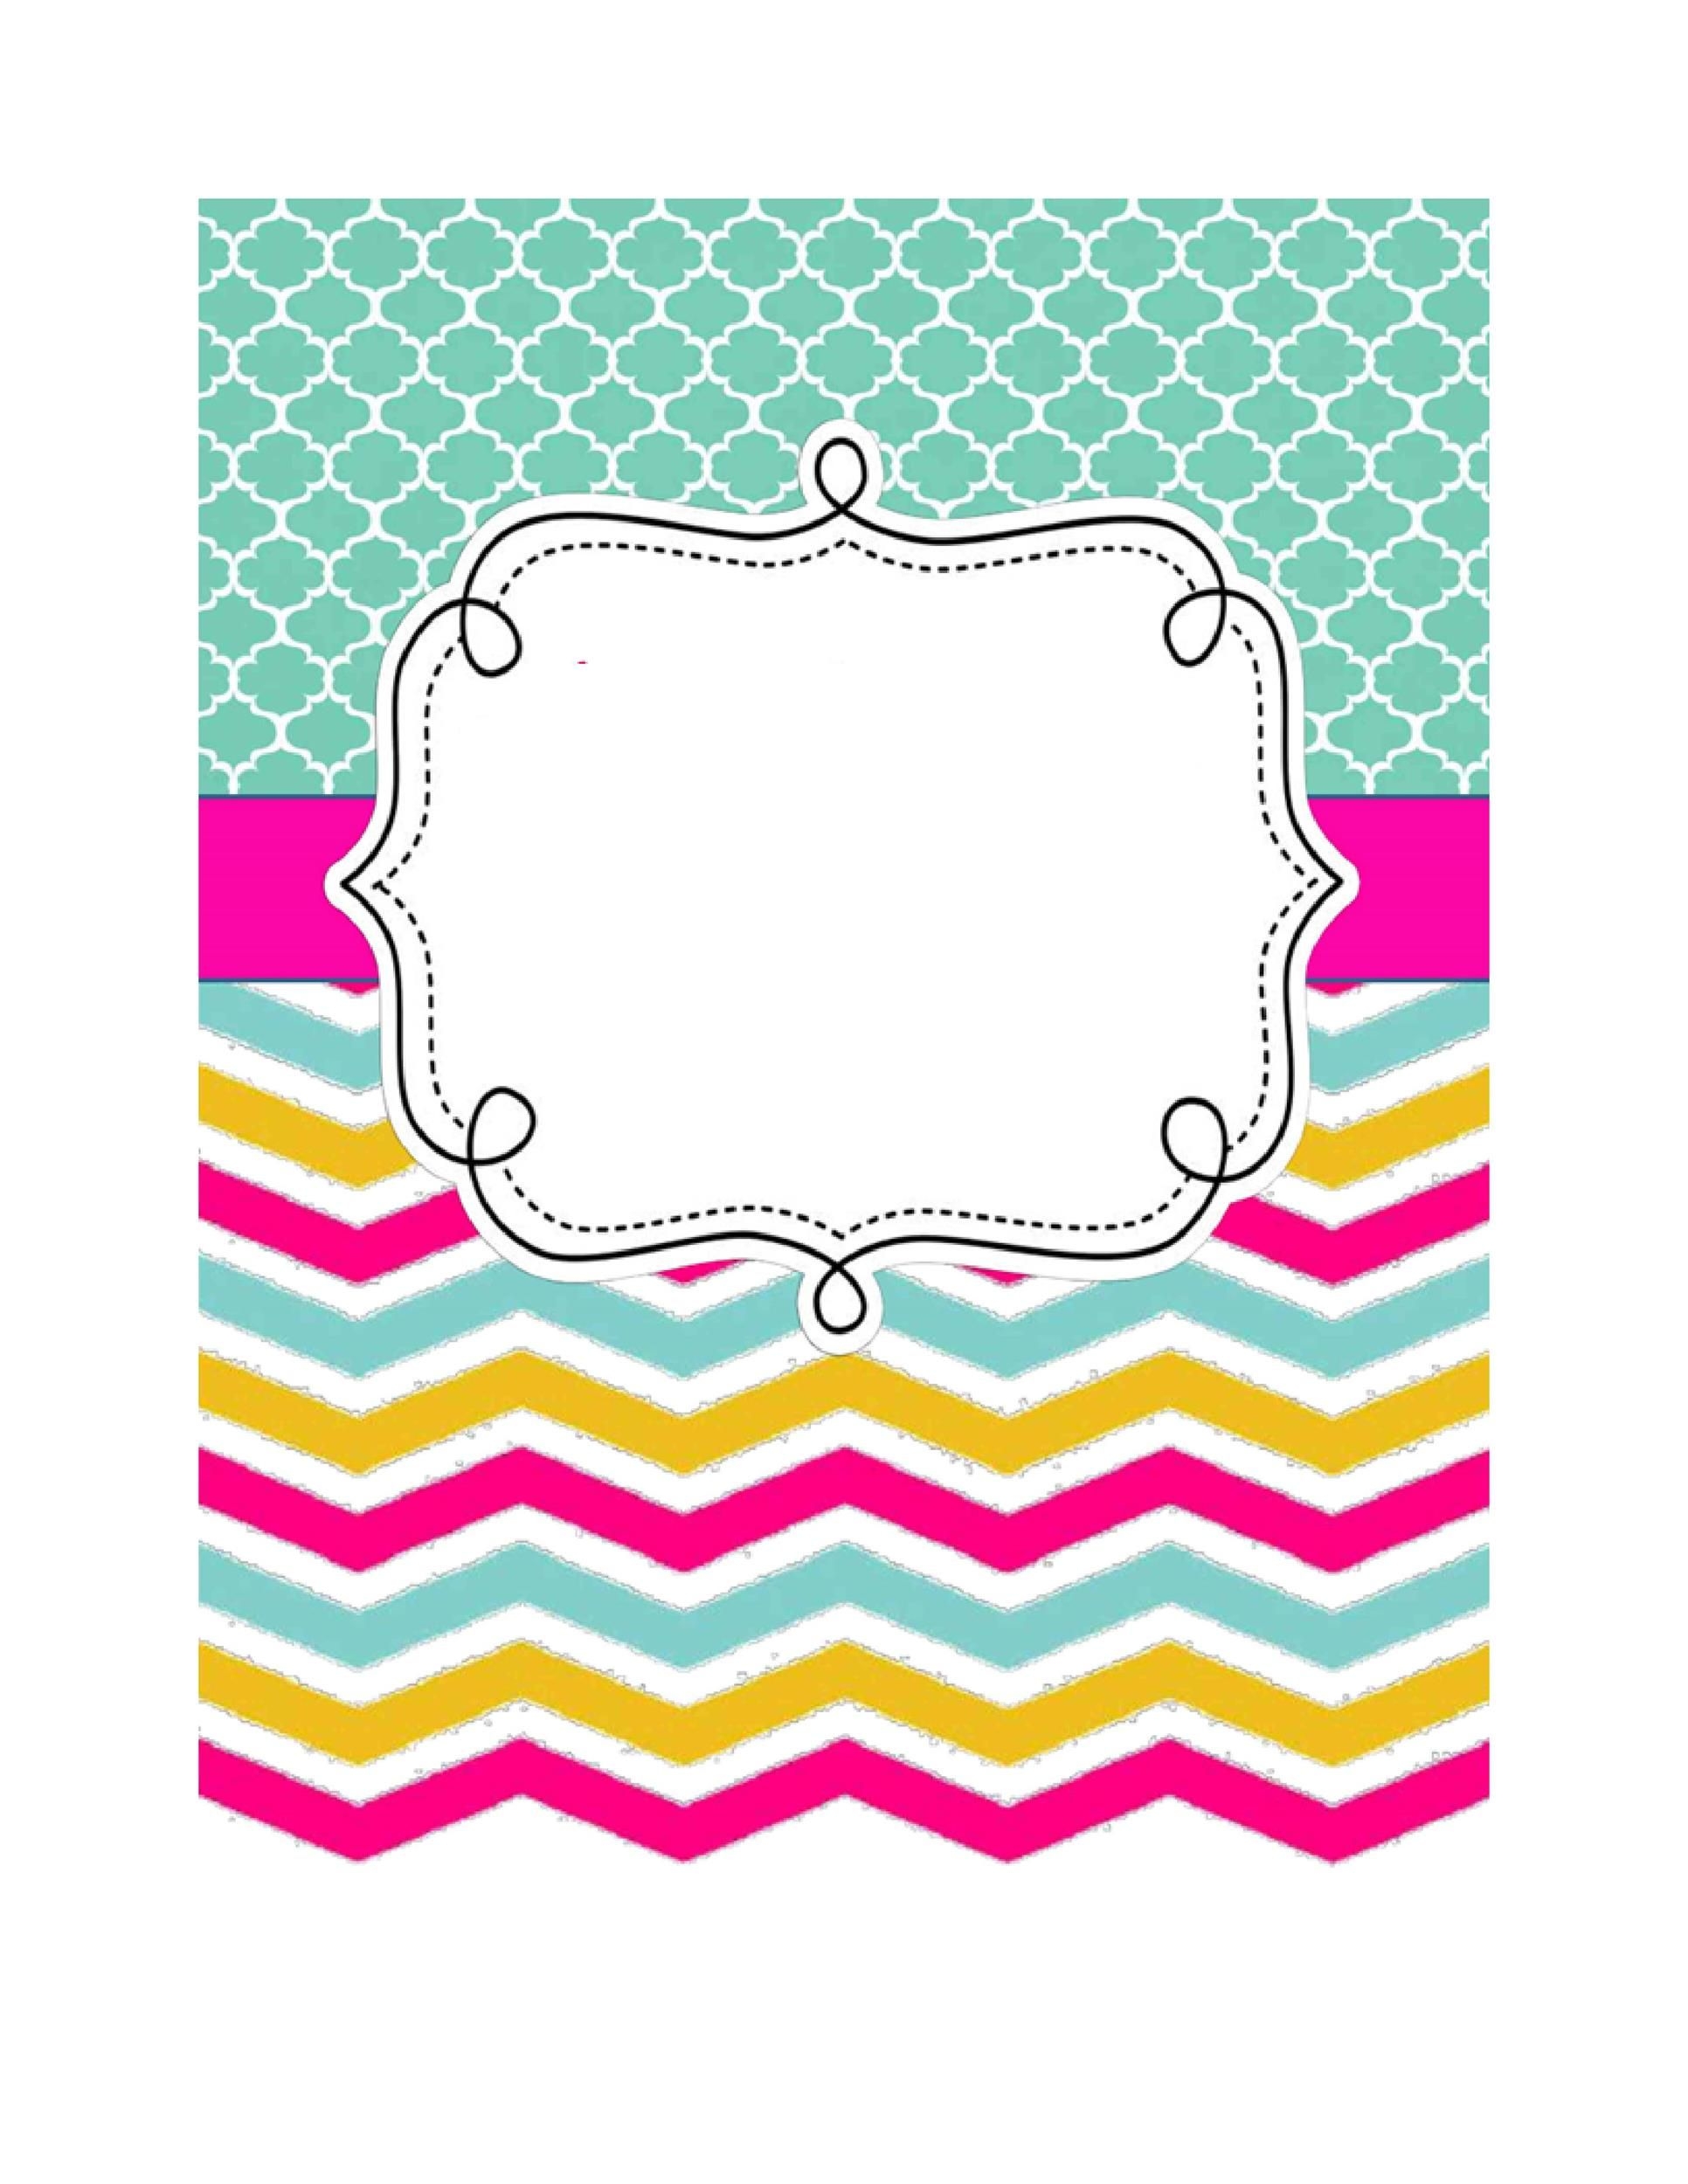 3 Ring Binder Cover Templates